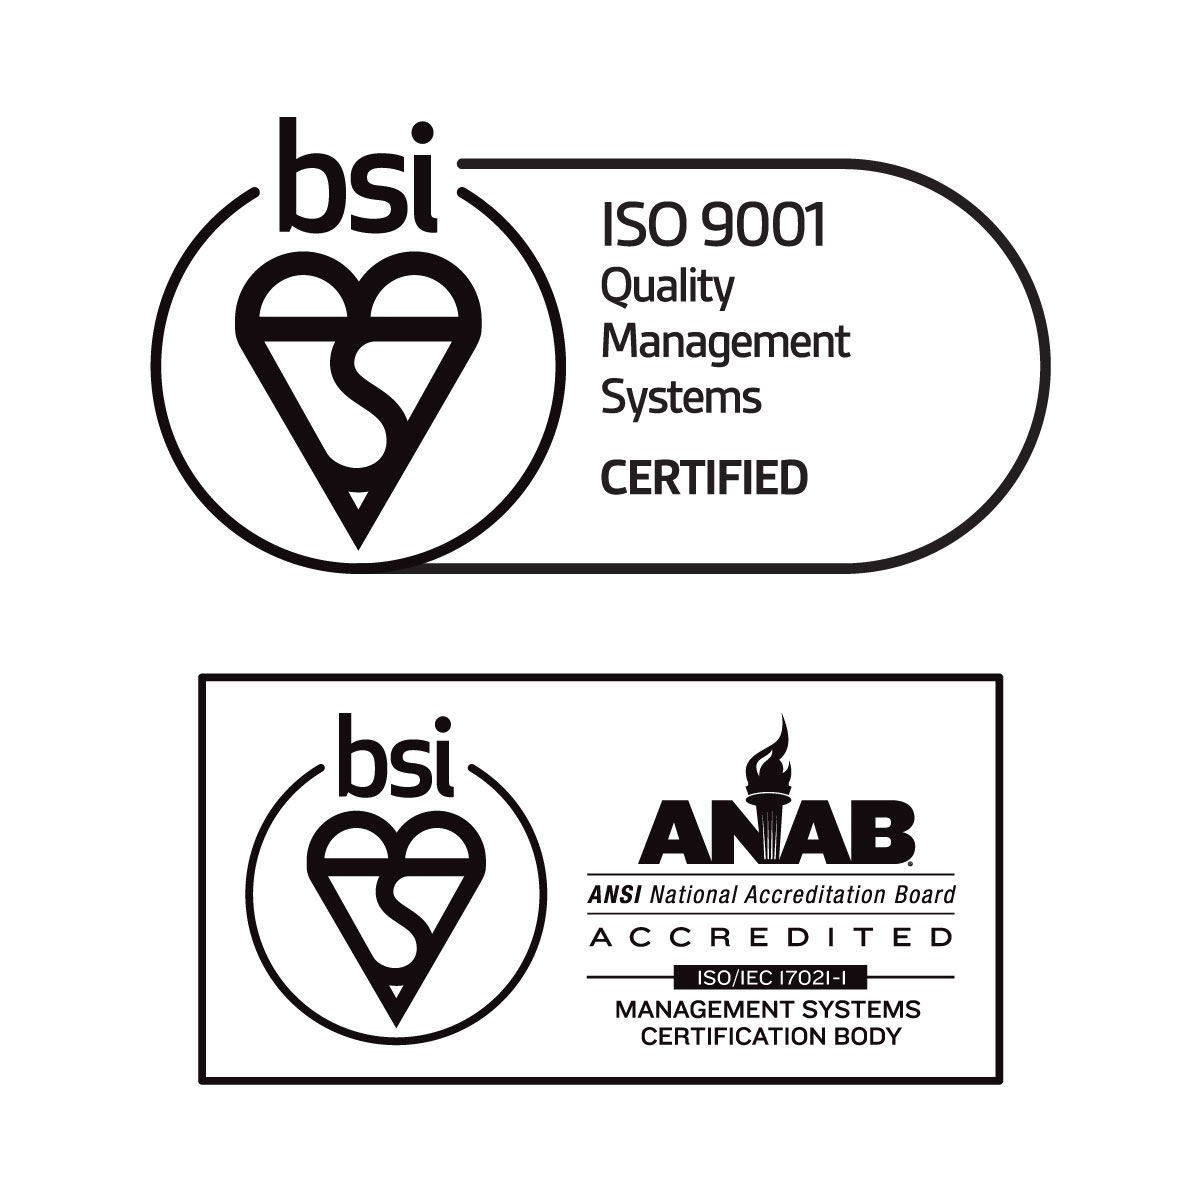 ISO 9001 - Certificate of Quality Management